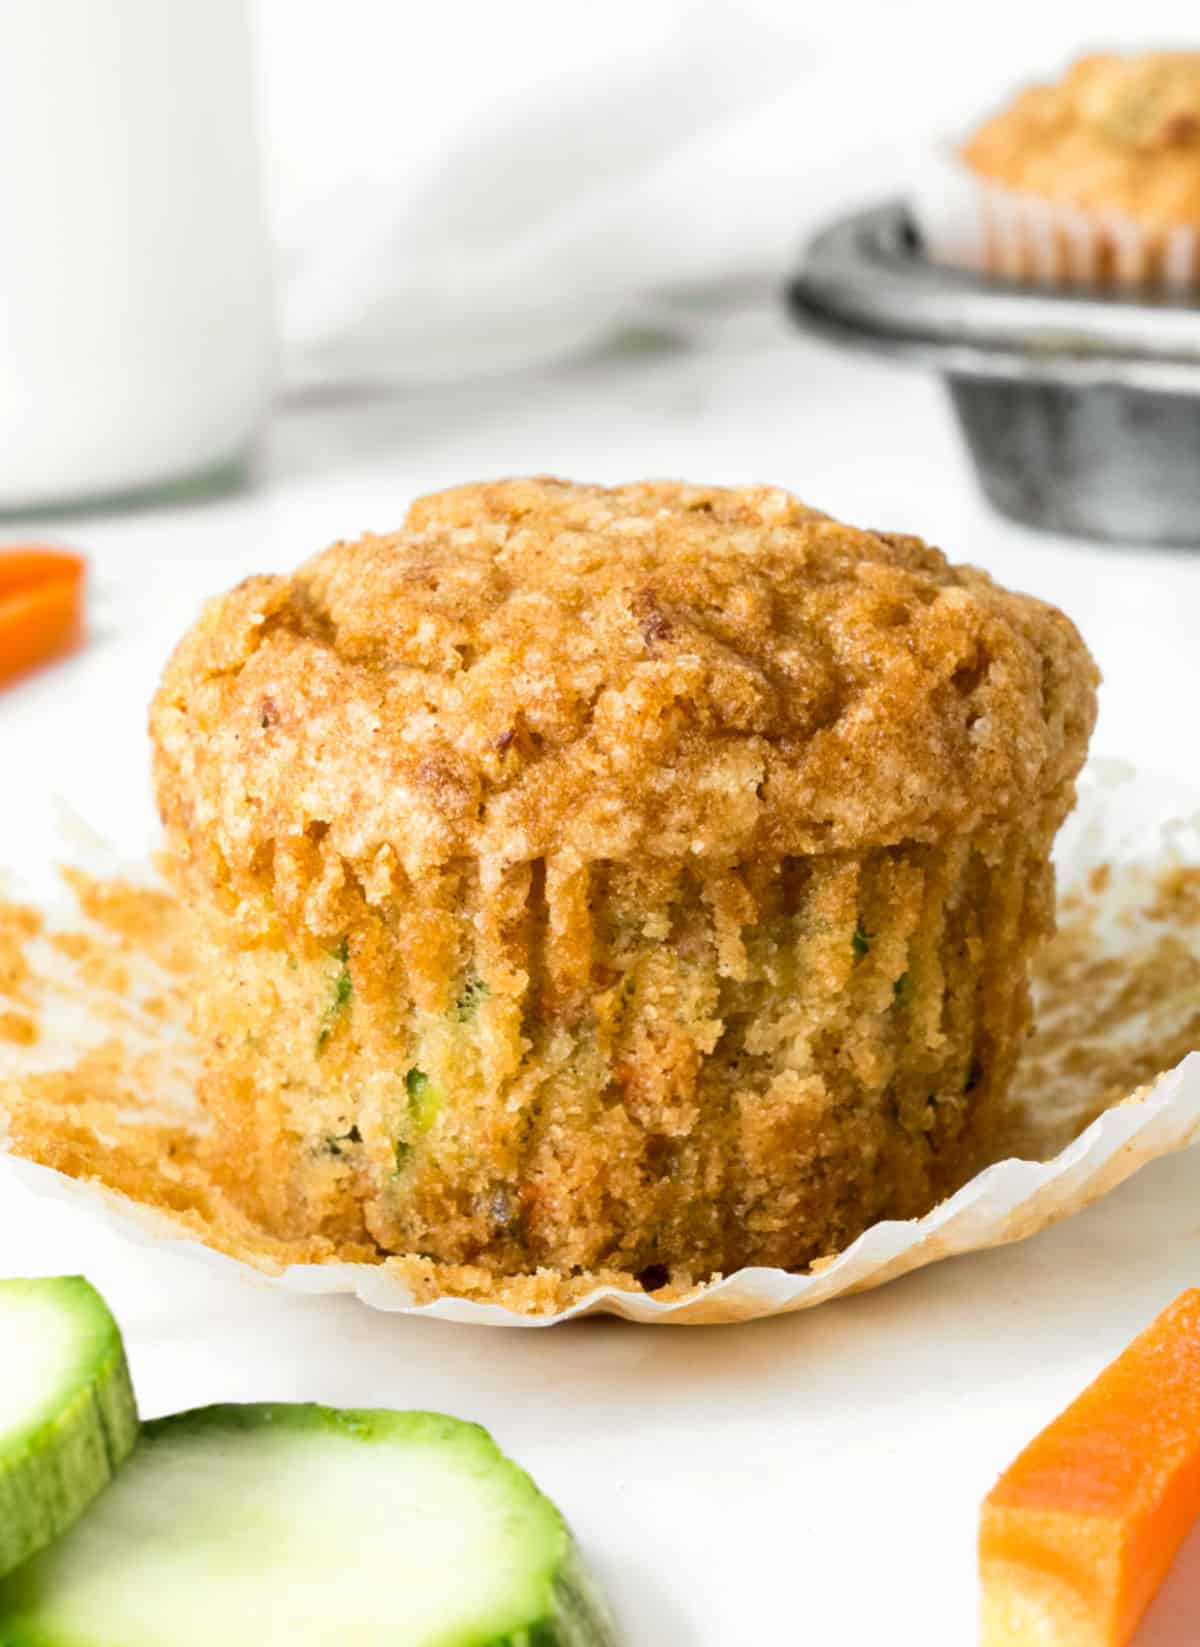 Opened paper liner with carrot zucchini muffin. White surface, zucchini and carrot pieces, muffin pan.